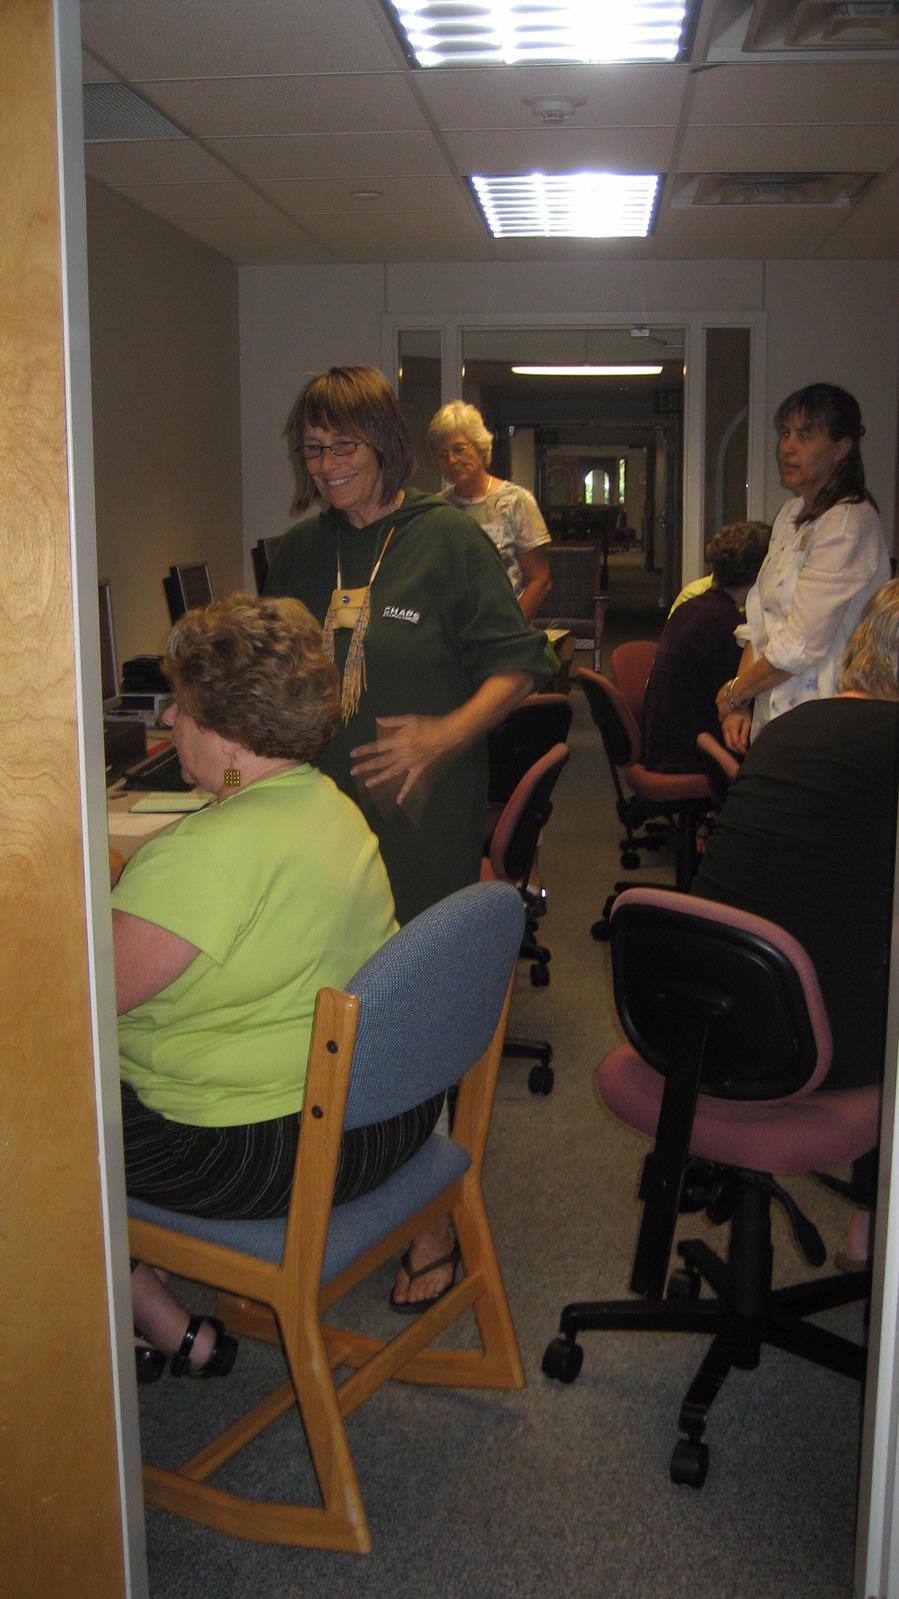 1 - 101340 - Jeanie's LightPages Clinic, St. Cloud, MN - 